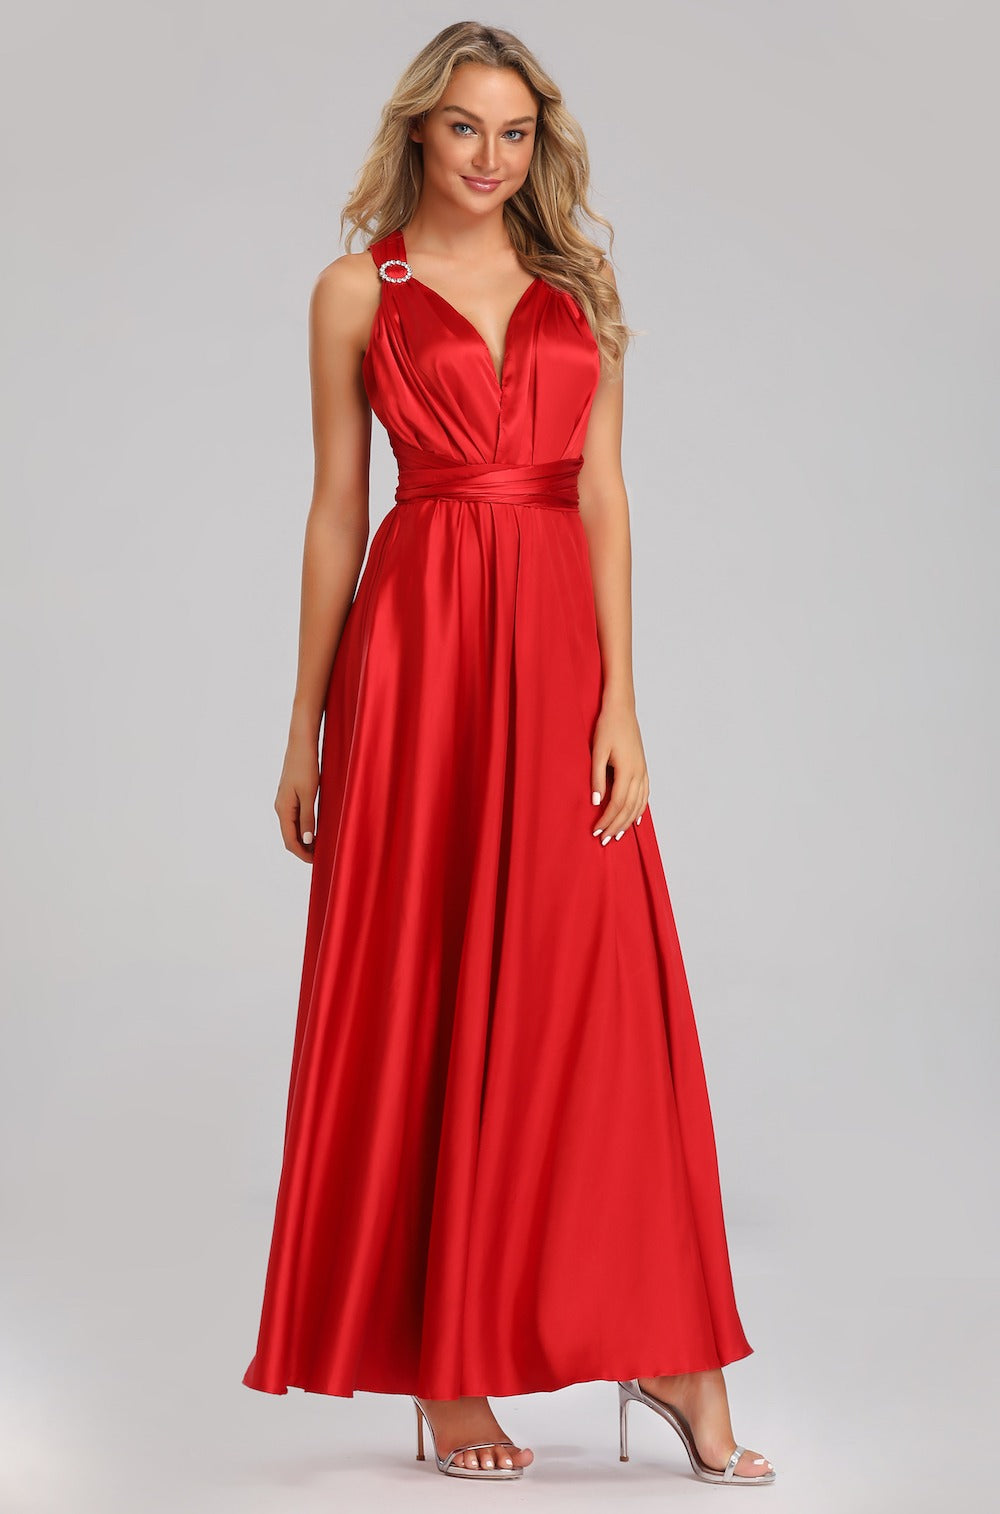 Rochie Amelie, Silky Satin Fabric, Passional red